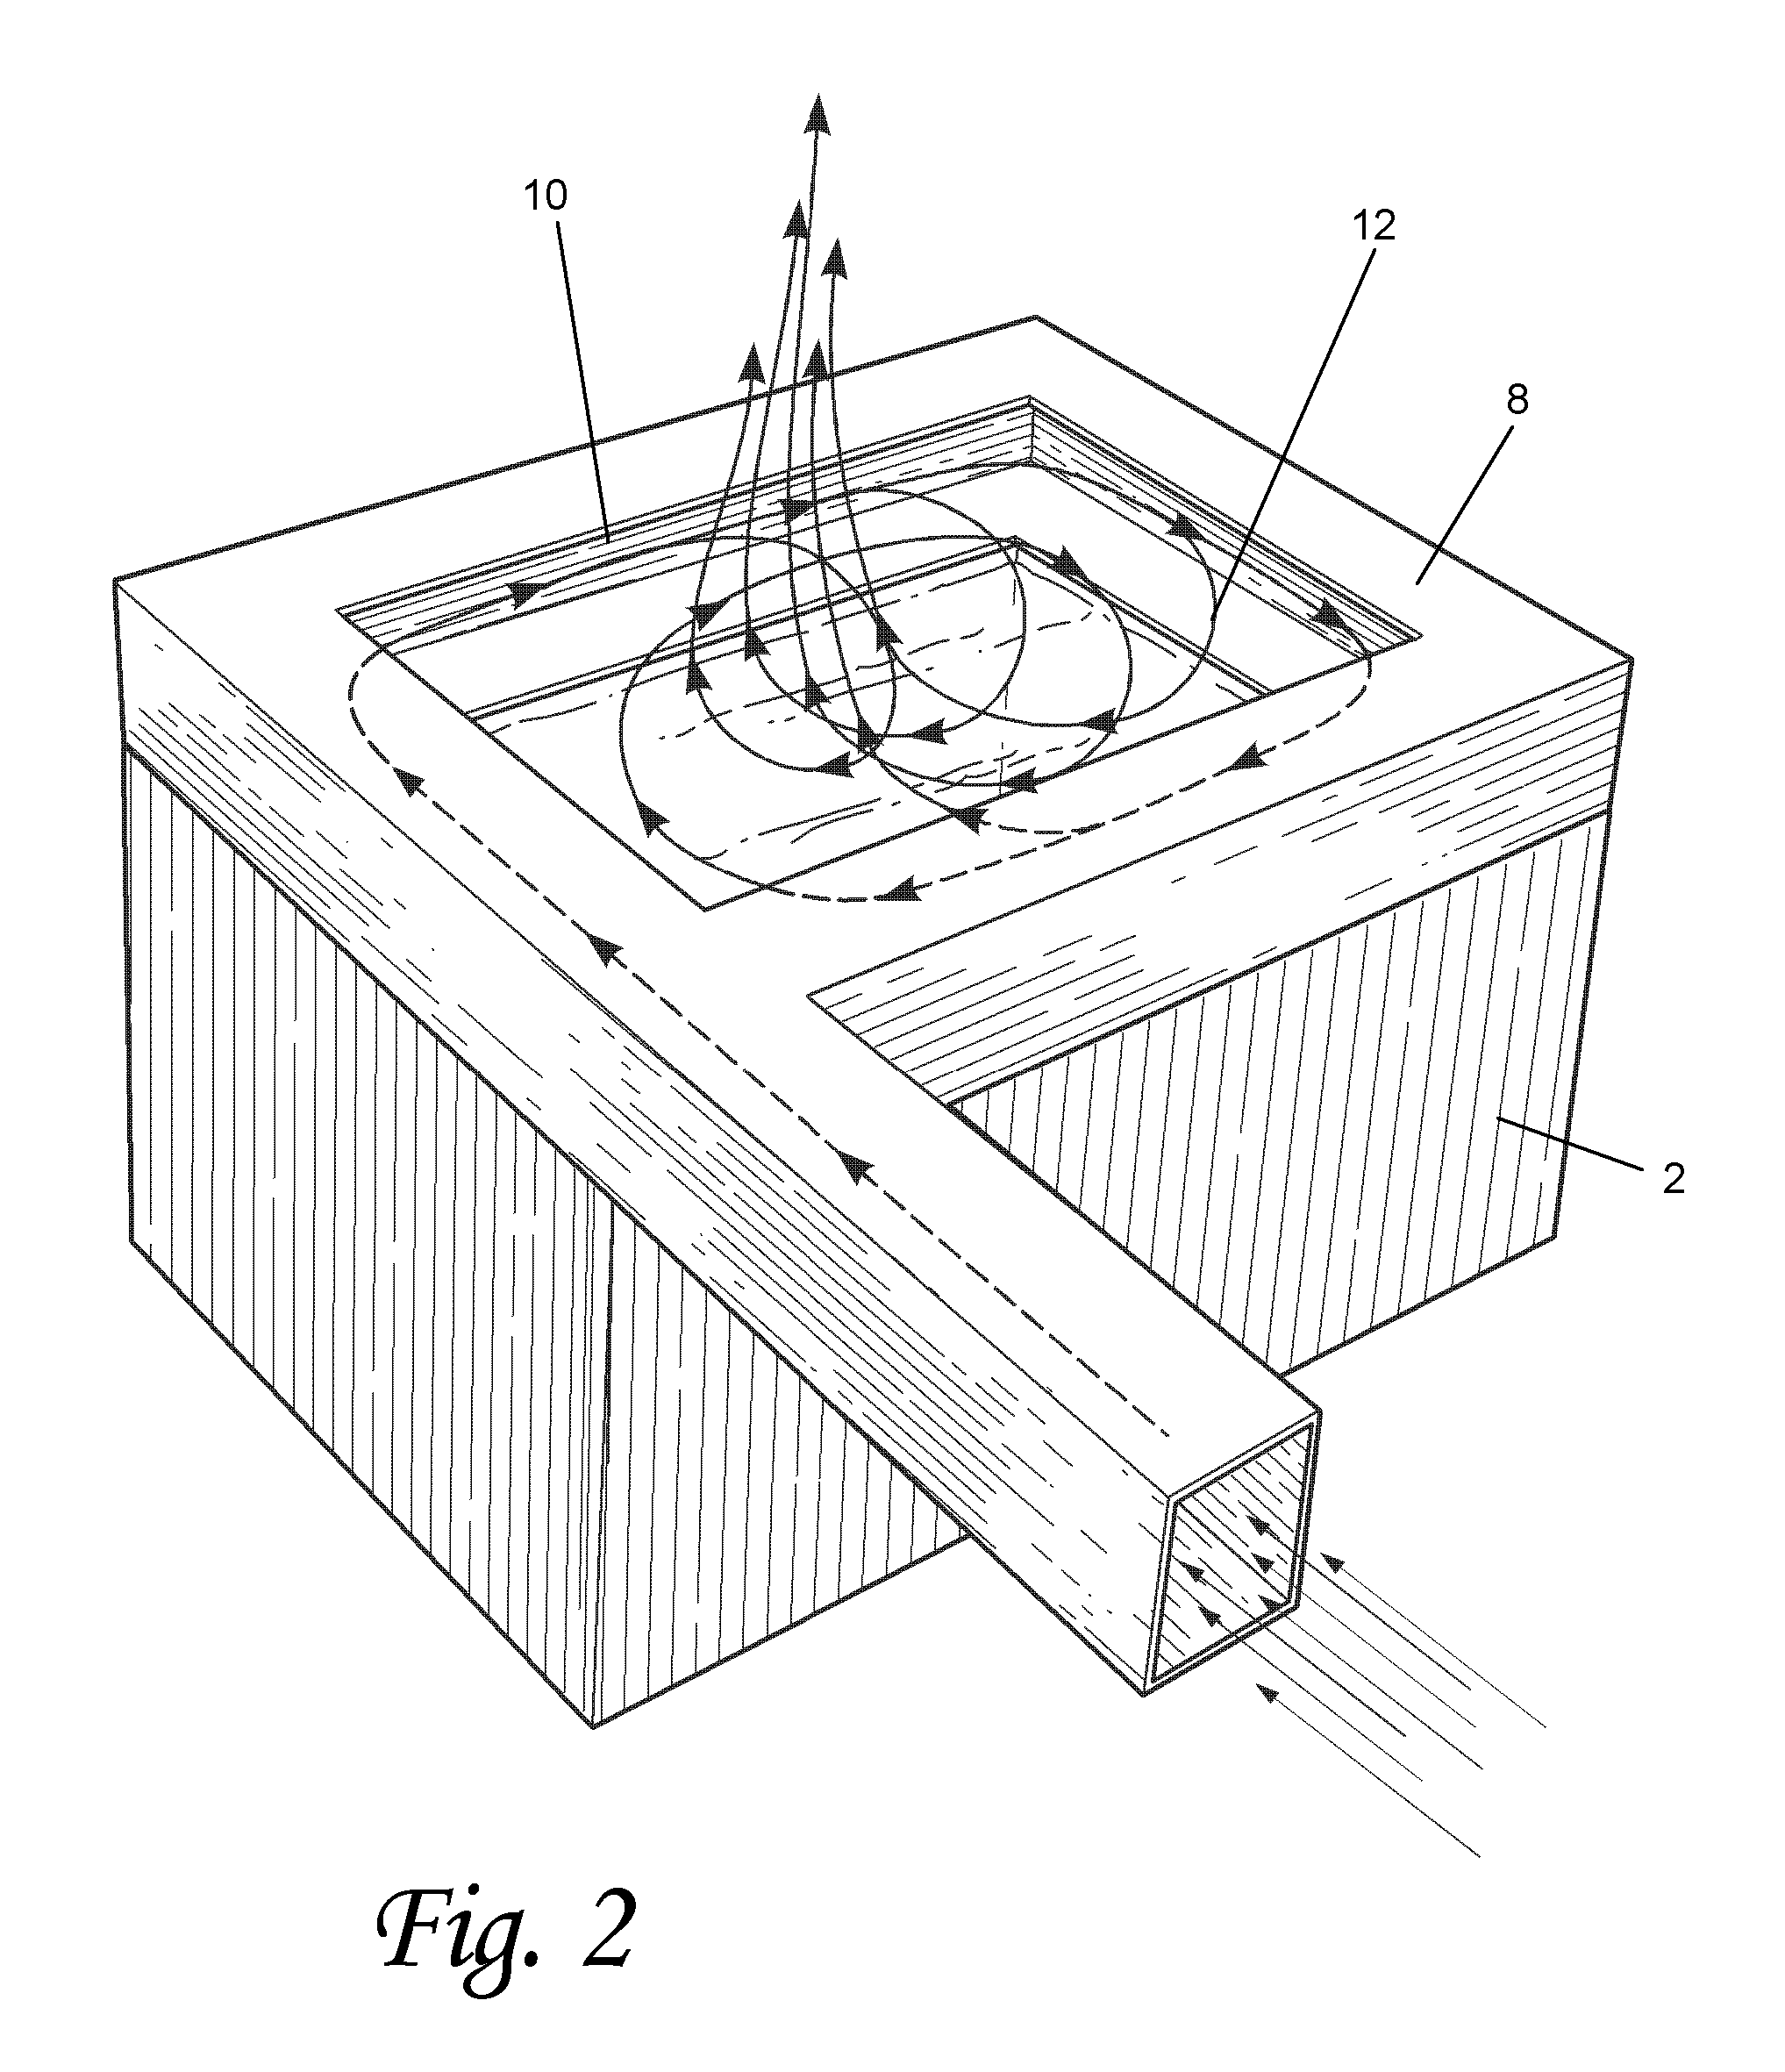 Method and device for suppression of fire by local flooding with ultra-fine water mist